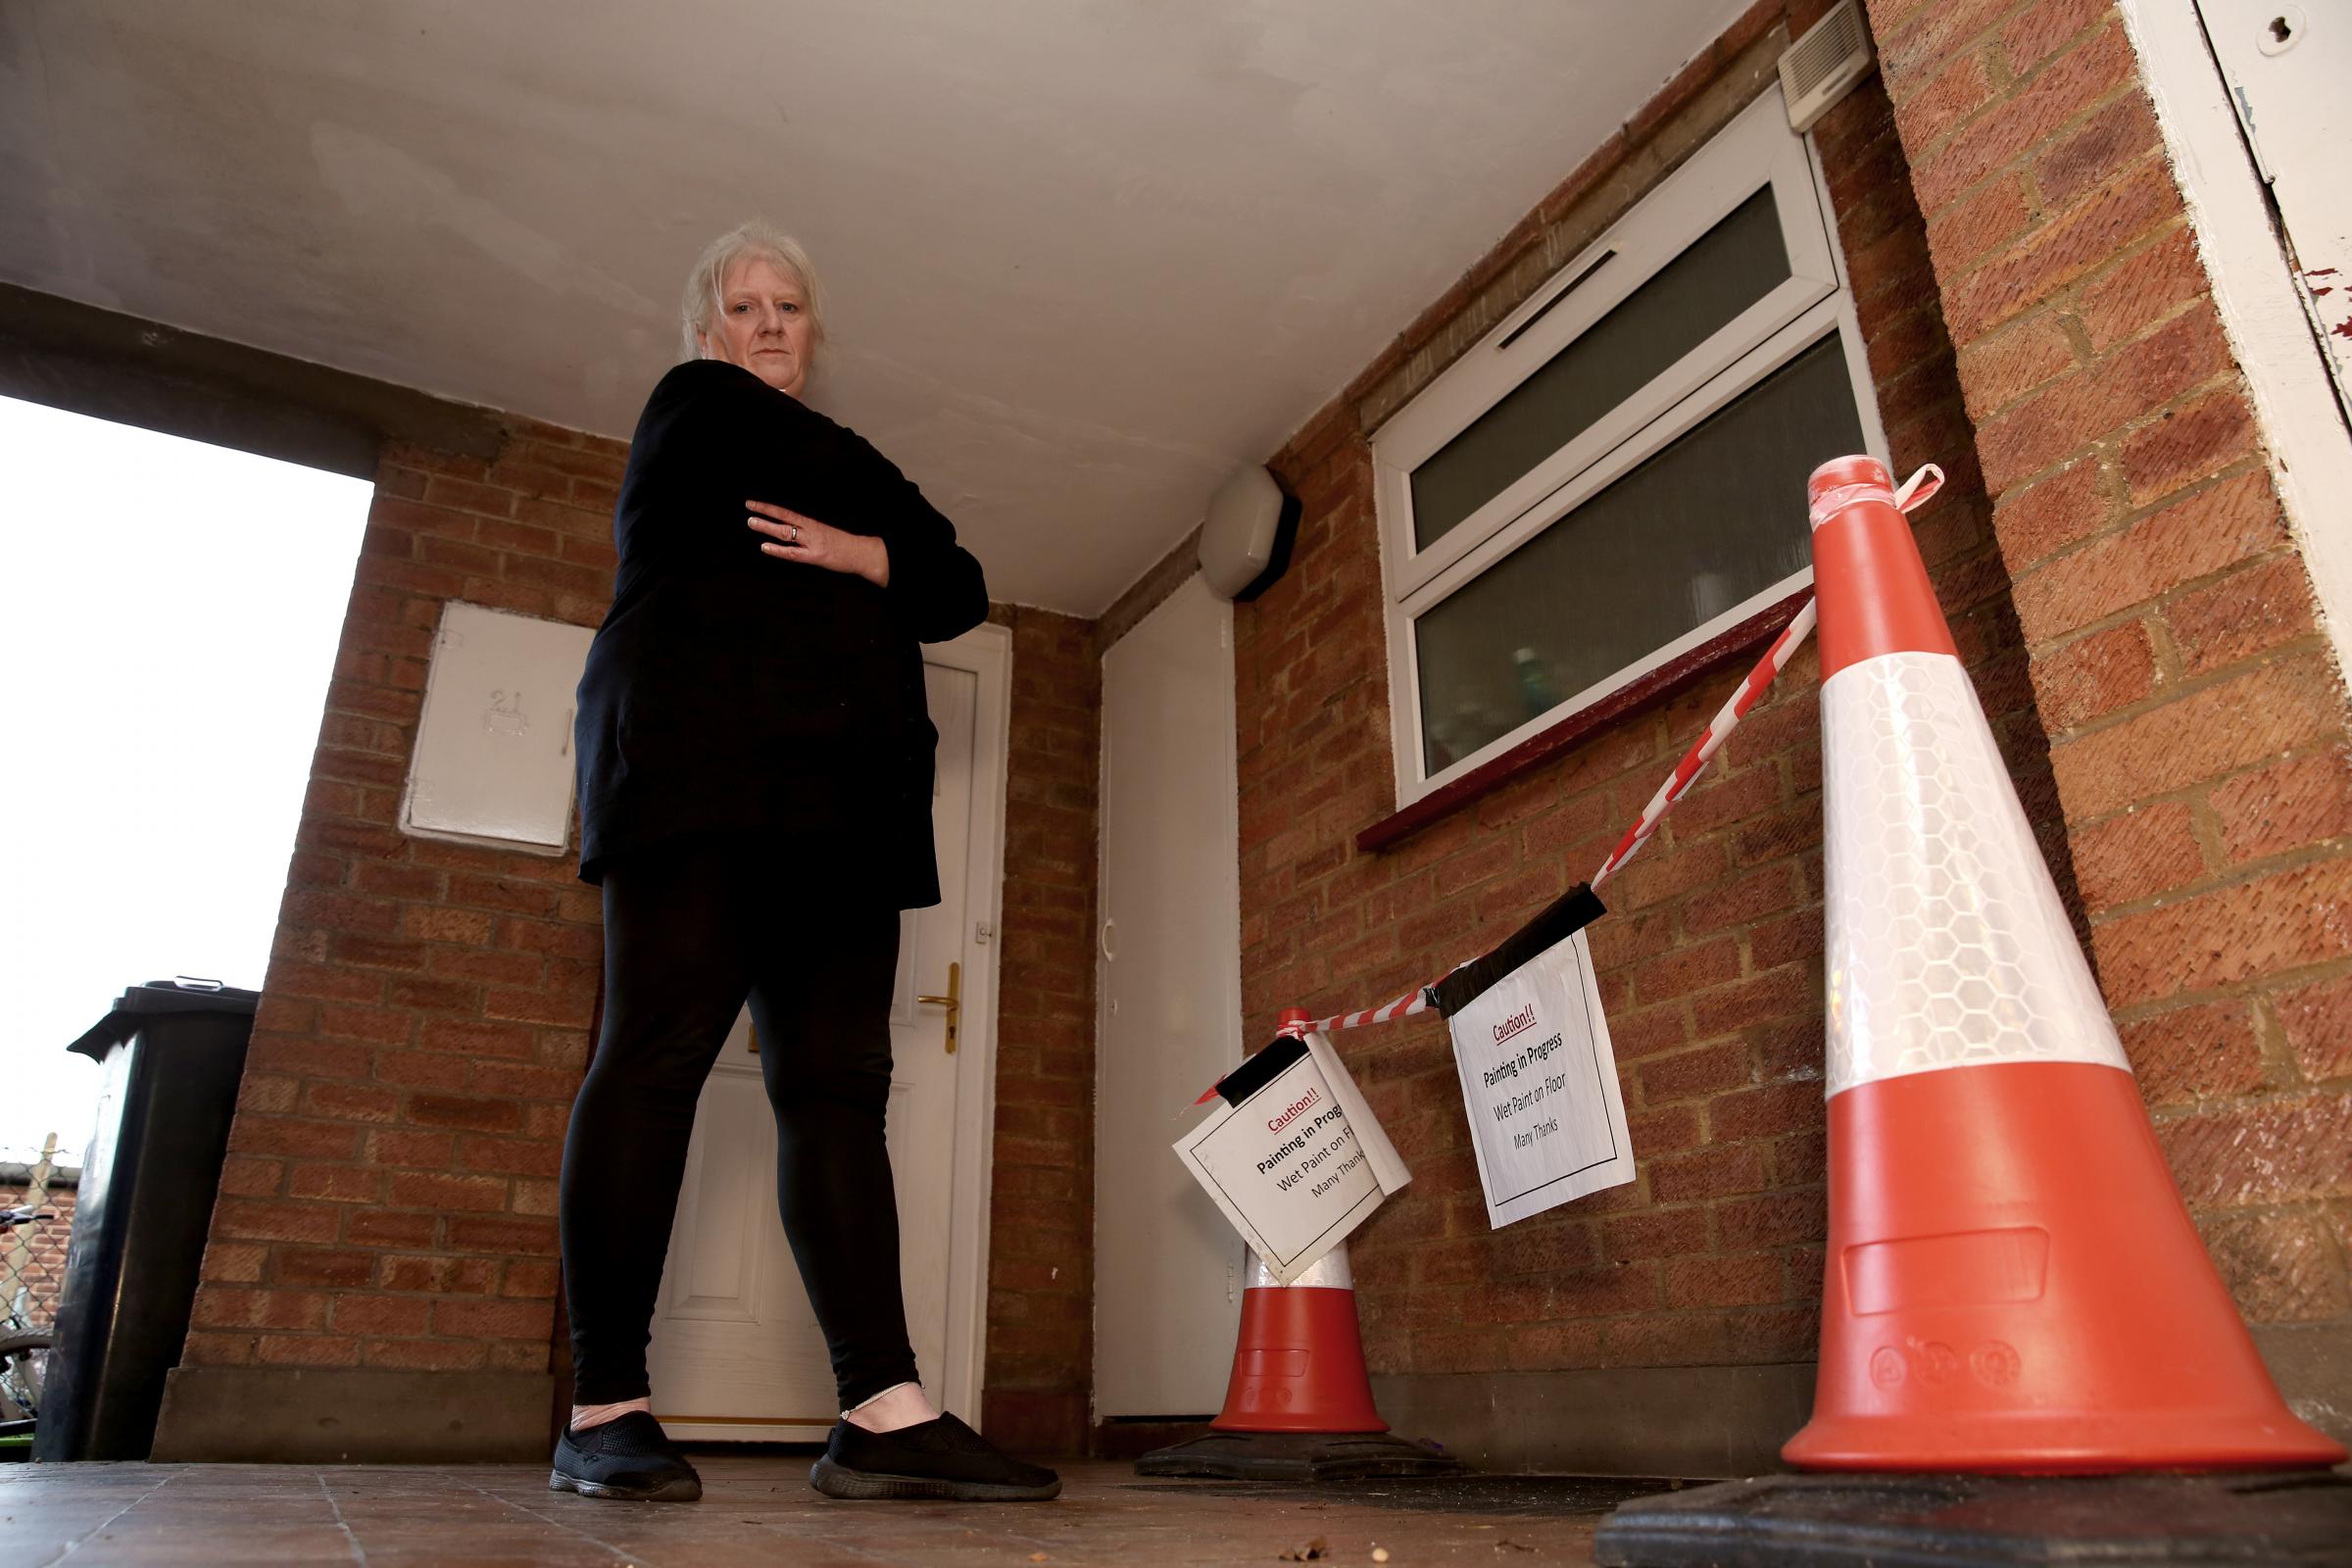 Cancer patient warns housing association of dangerous flooring for three years